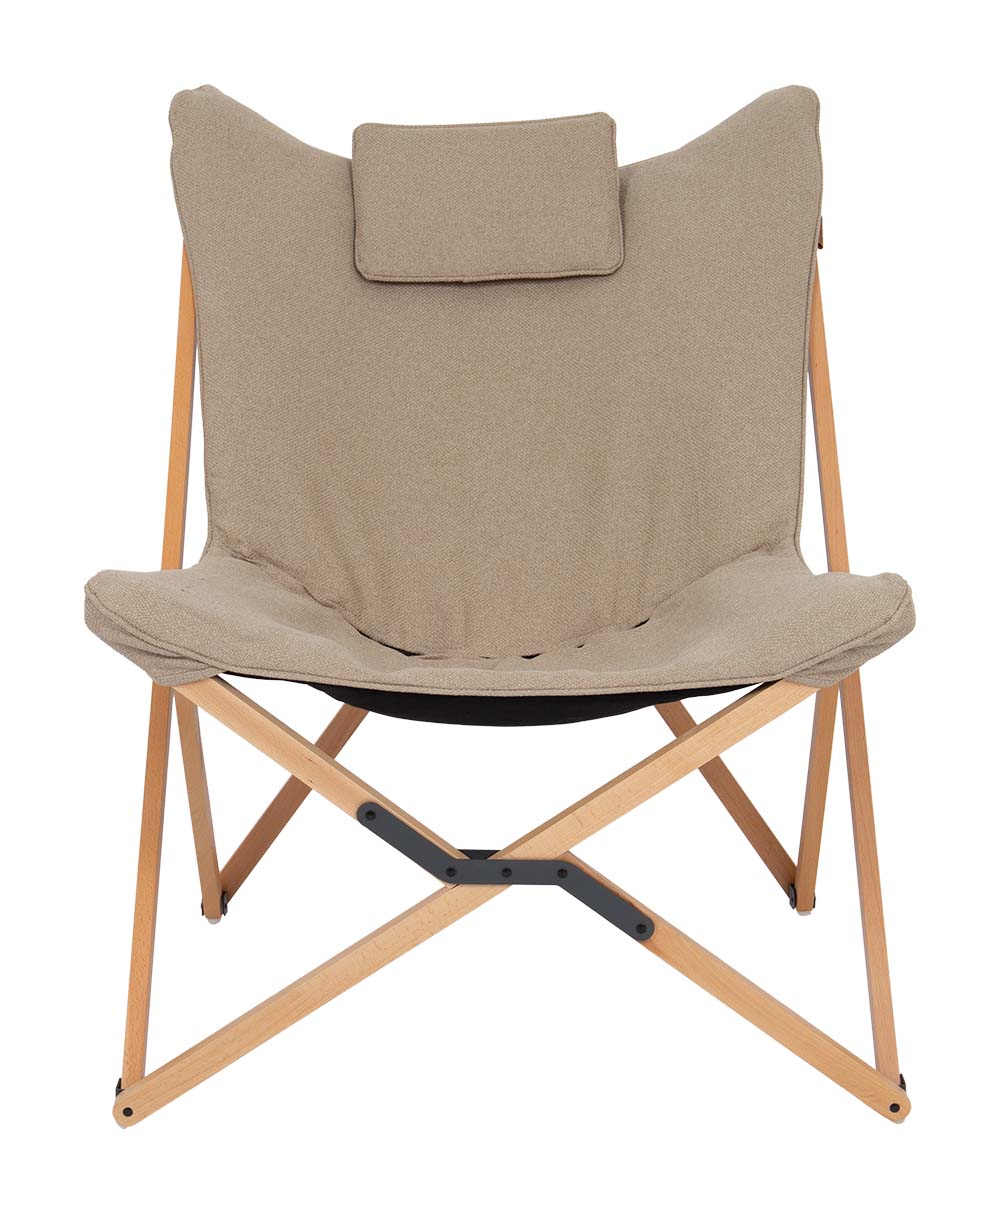 Bo-Camp - Urban Outdoor collection - Relax chair - Wembley - L - Nika - Beige detail 2